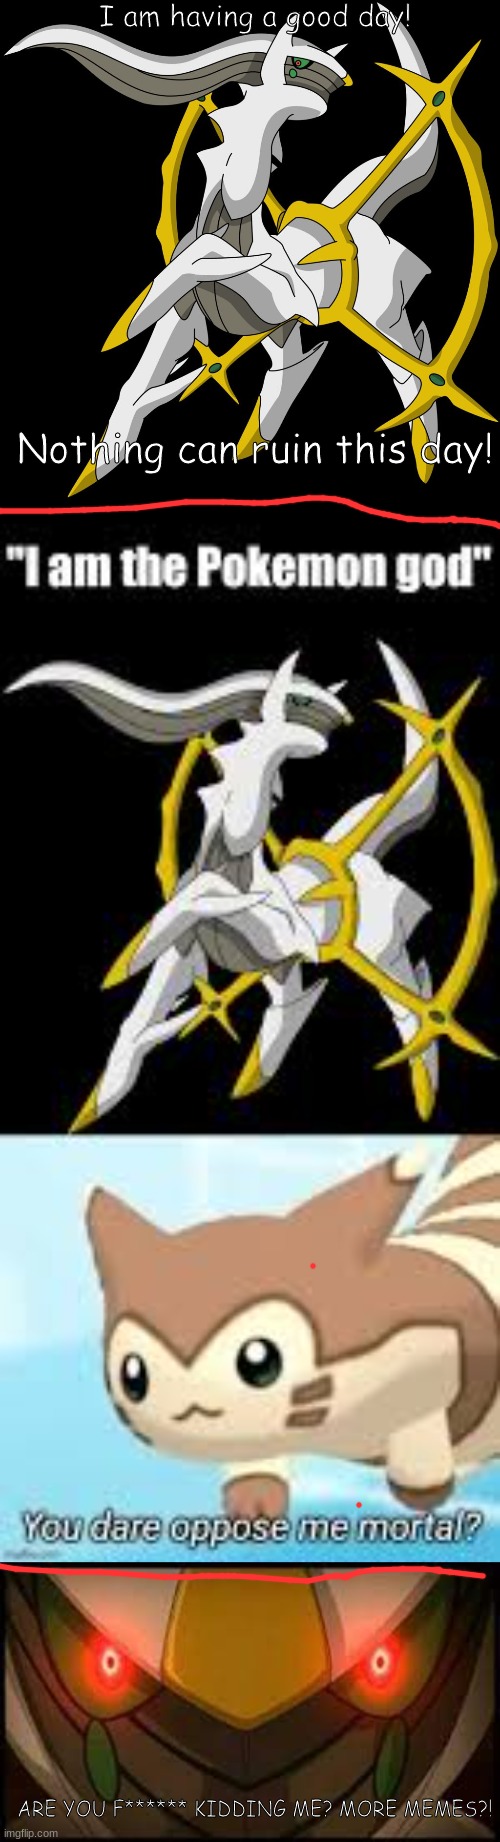 ANGERY ARCEUS | I am having a good day! Nothing can ruin this day! ARE YOU F****** KIDDING ME? MORE MEMES?! | image tagged in arceus | made w/ Imgflip meme maker